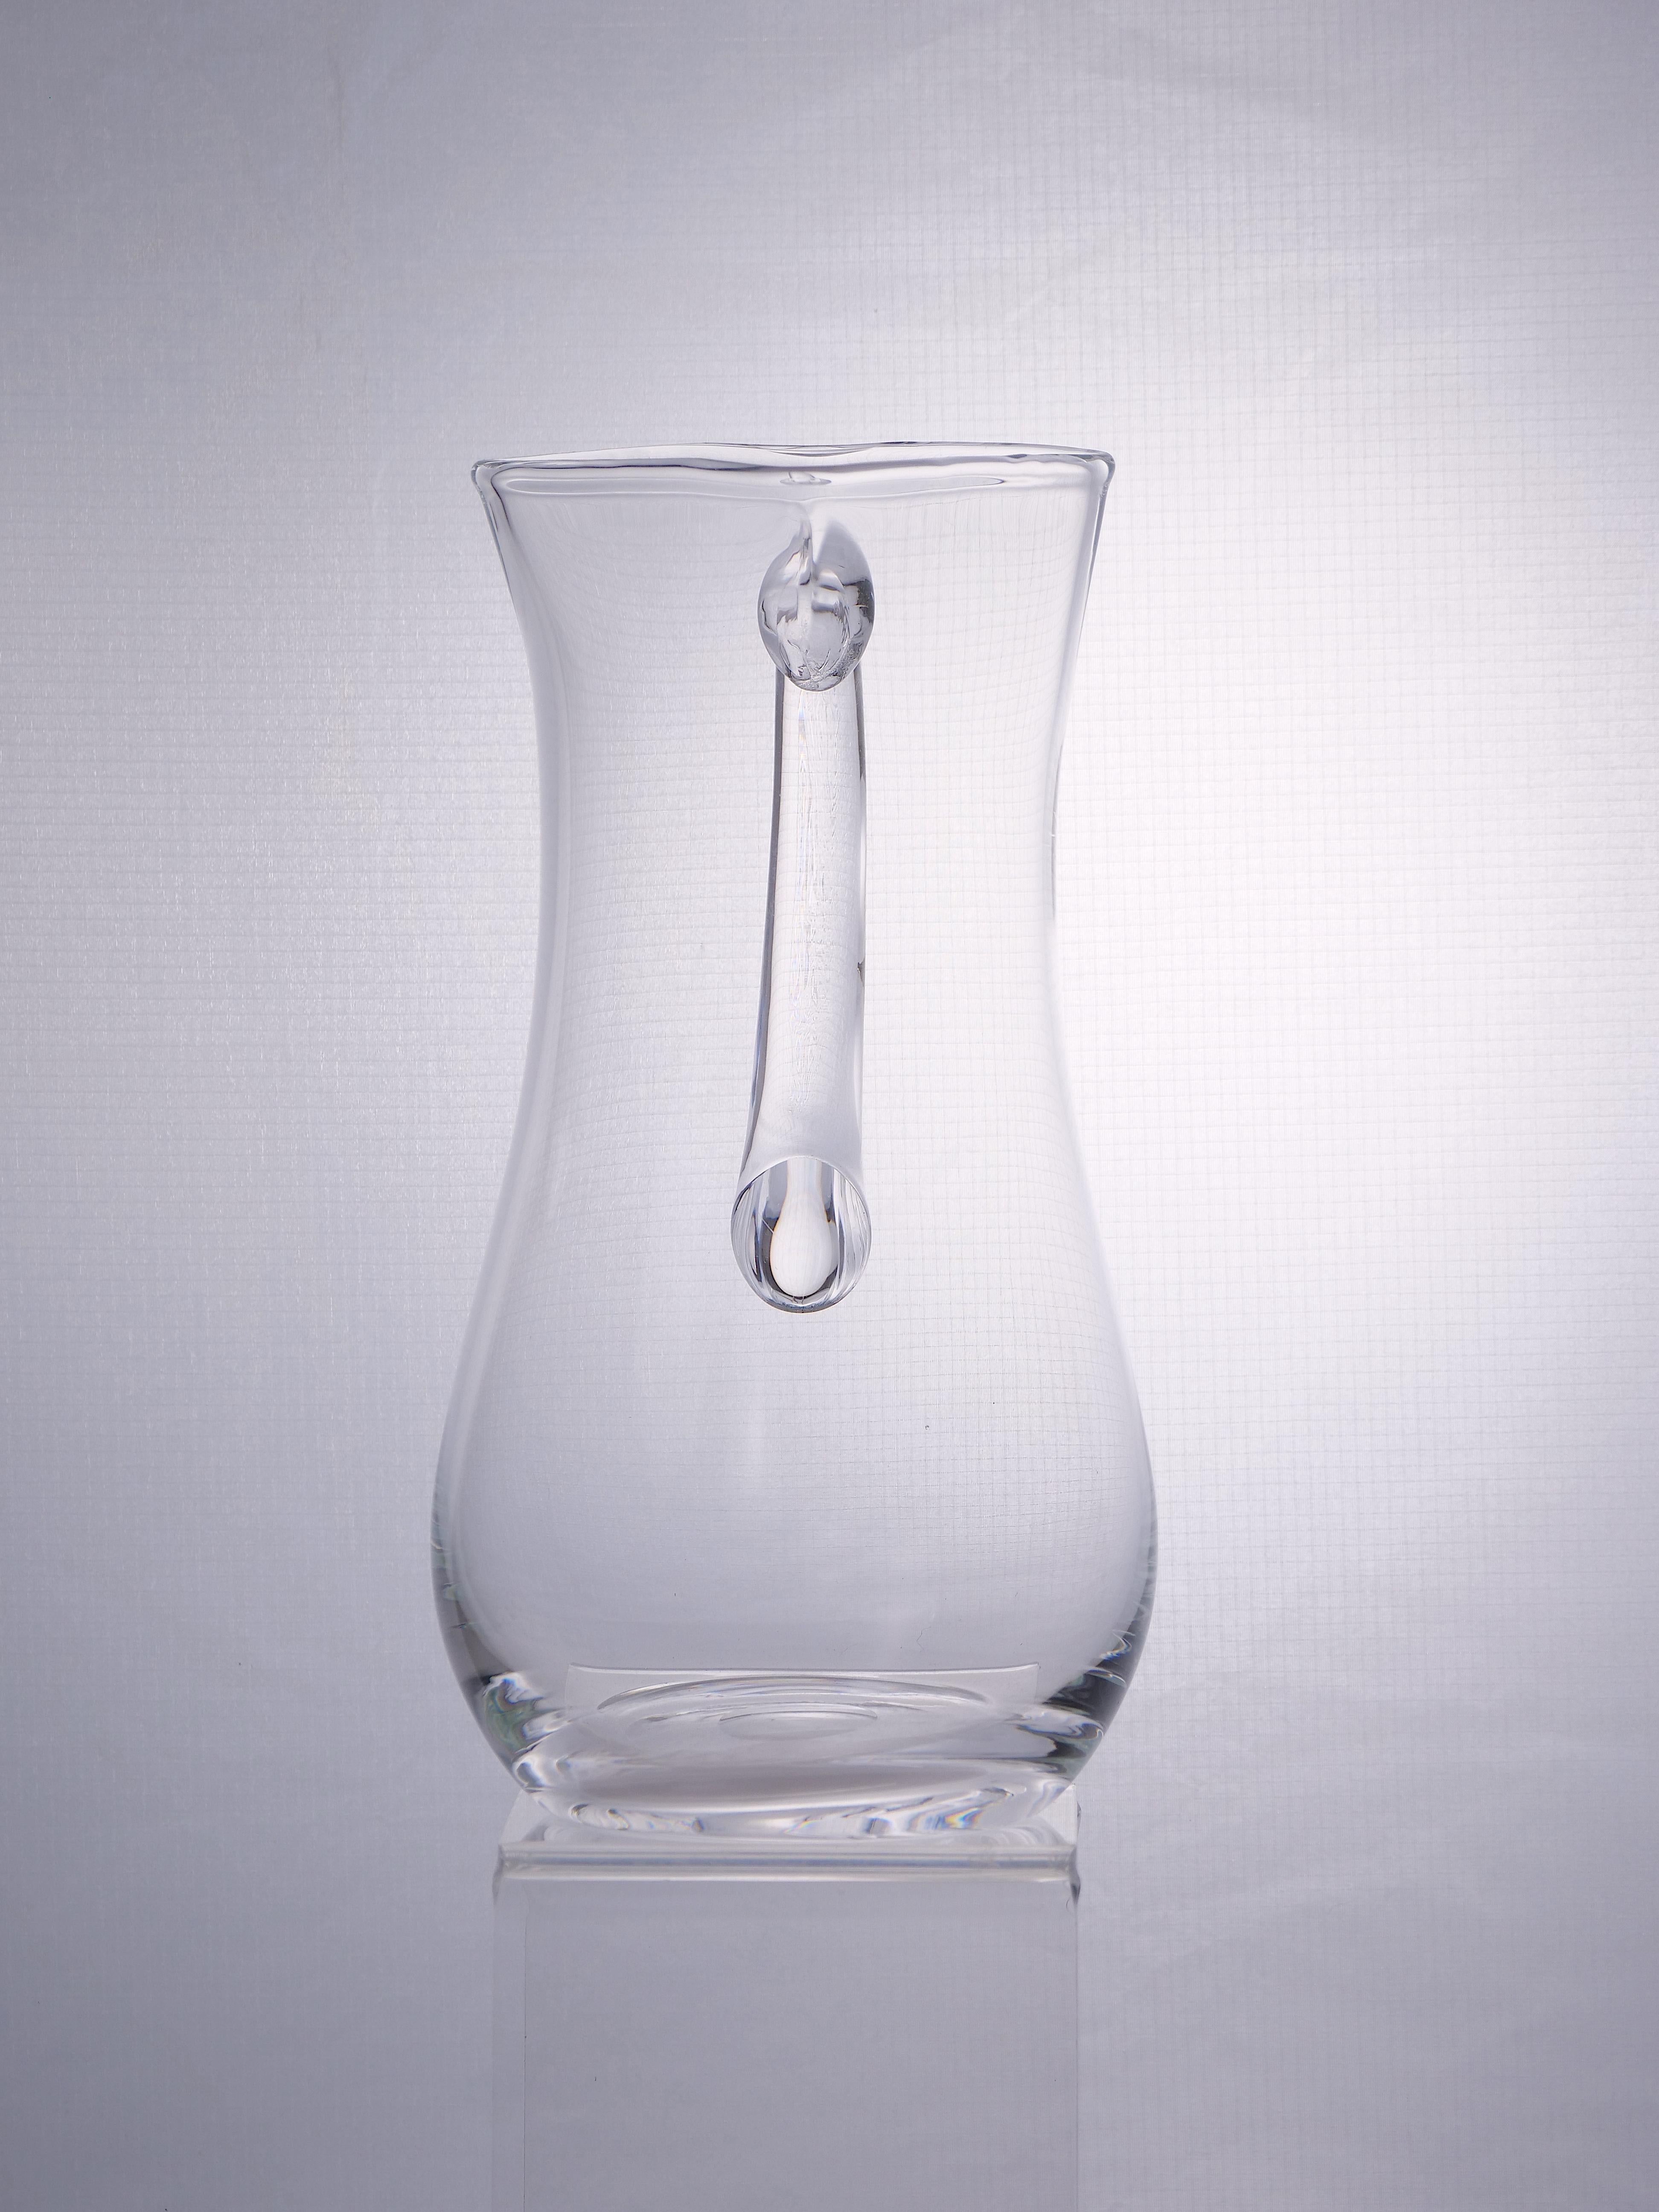 Mid-Century Modern Crystal Barware / Tableware Serving Pitcher For Sale 3